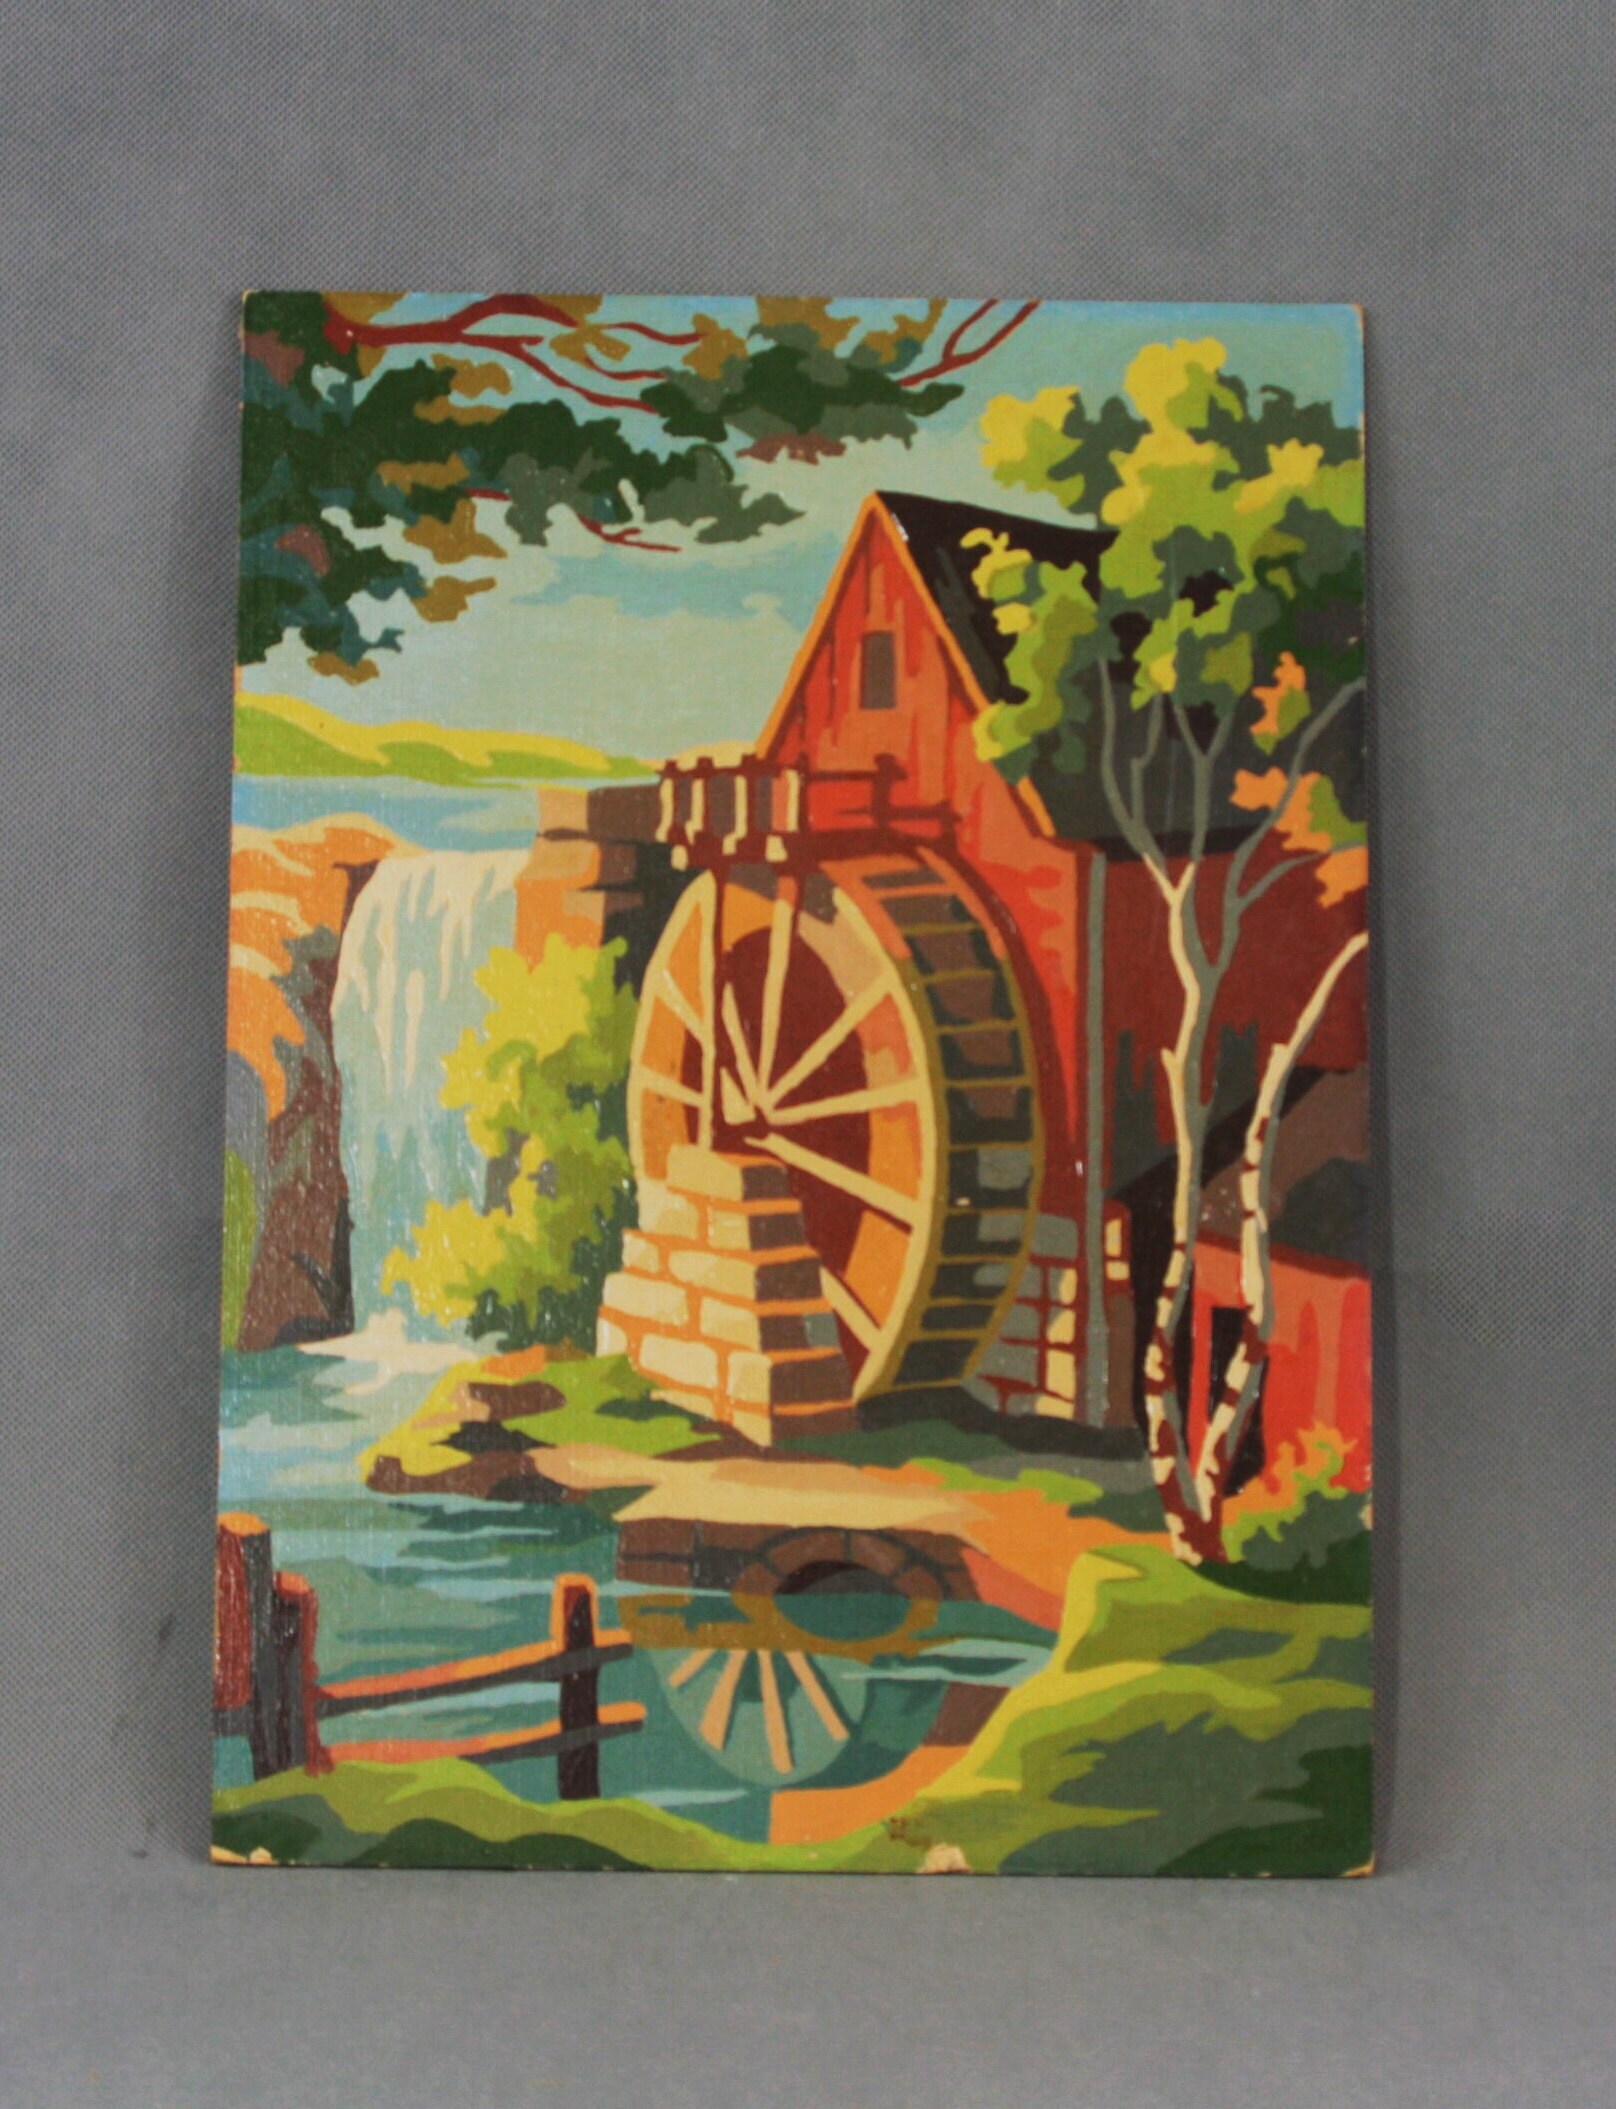 Vintage Style PAINT by NUMBER Kit Adult, Water Mill River Landscape Art ,  Easy Beginner Acrylic Painting DIY Kit,home Decor Gift 